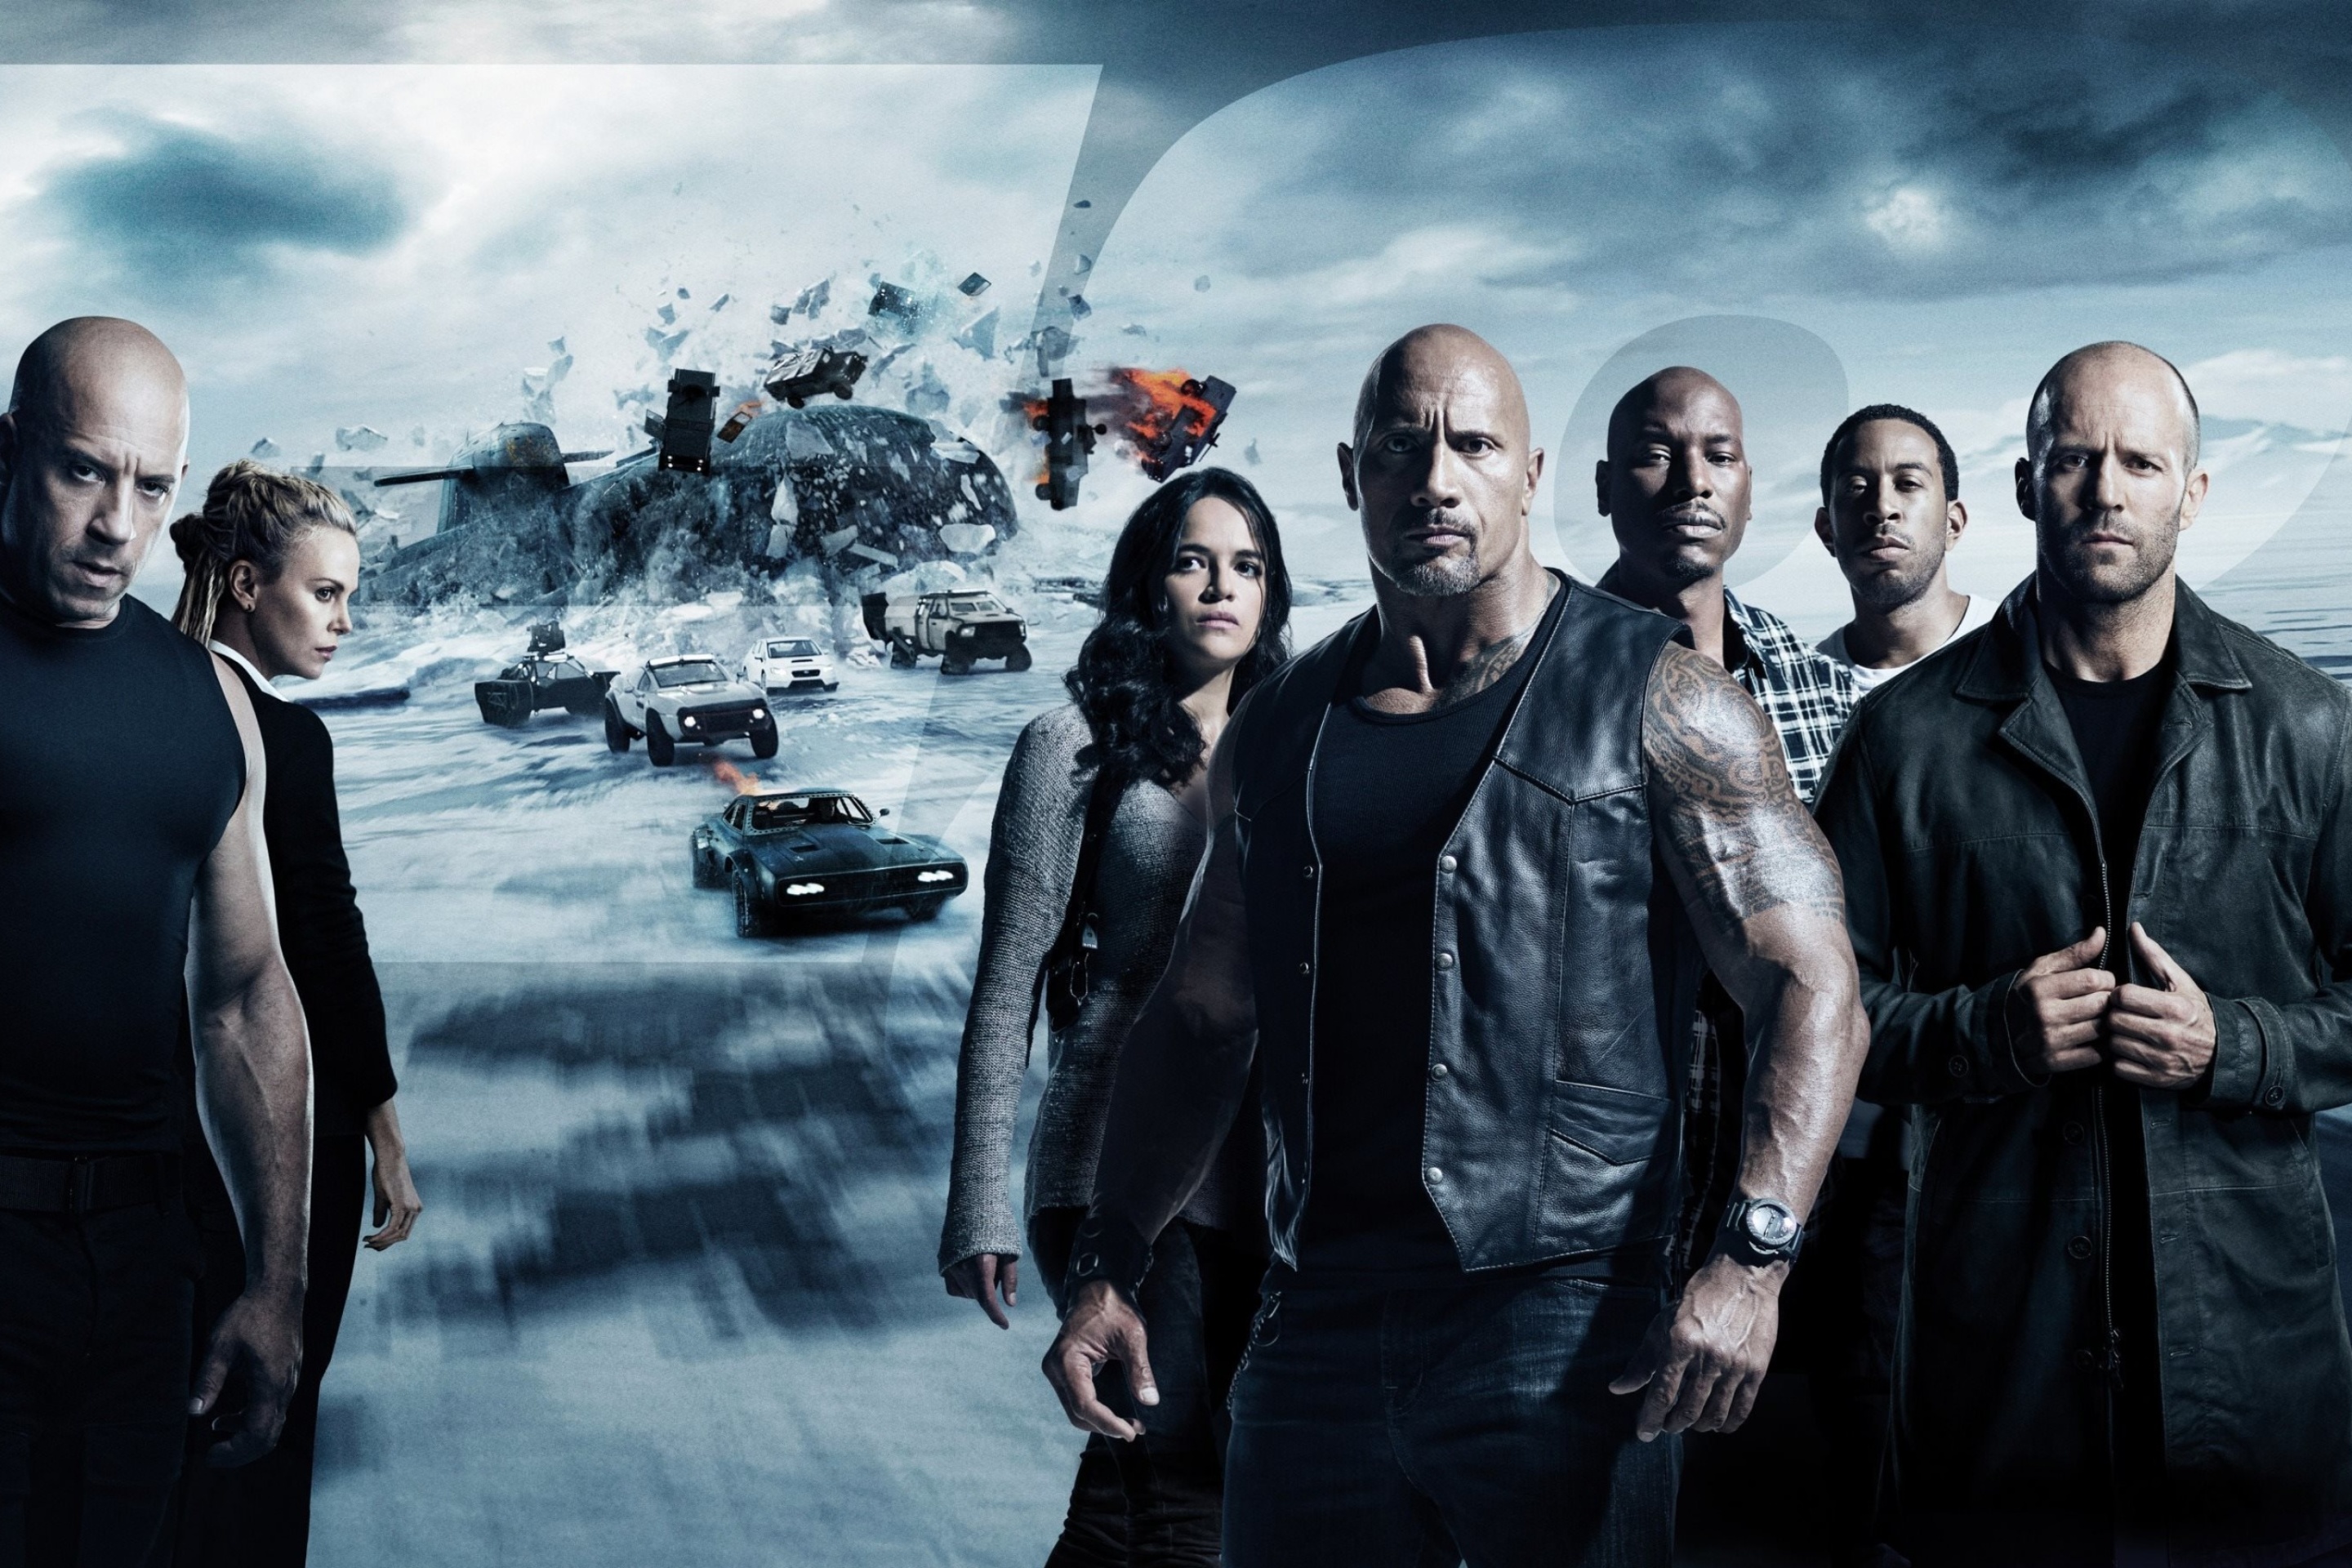 Das The Fate of the Furious with Vin Diesel, Dwayne Johnson, Charlize Theron Wallpaper 2880x1920